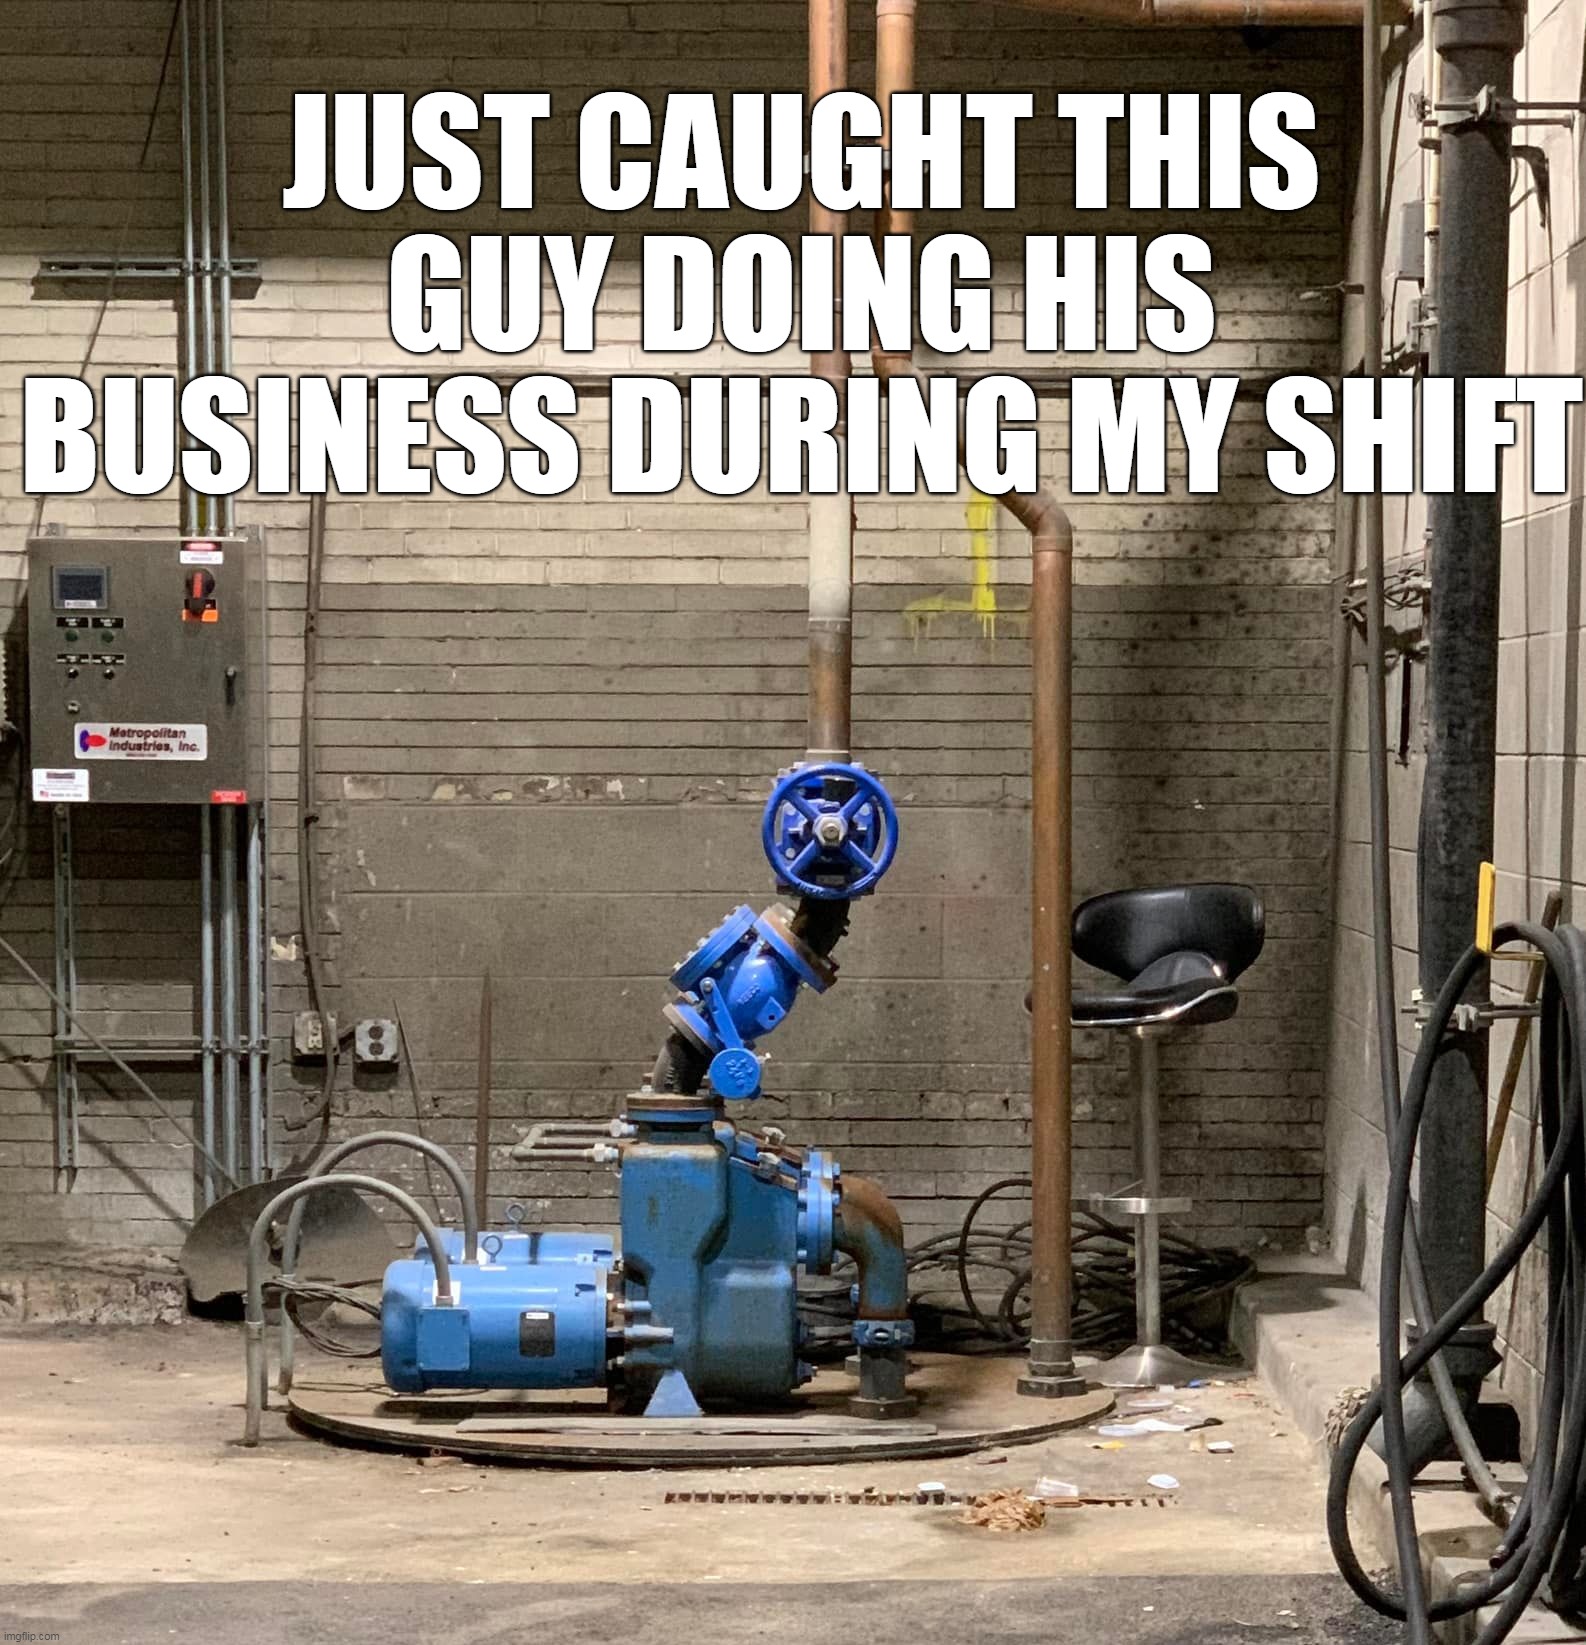 Not Even Safe Enough to Get Away from OSHA's Clutches | JUST CAUGHT THIS GUY DOING HIS BUSINESS DURING MY SHIFT | image tagged in meme,memes,humor | made w/ Imgflip meme maker